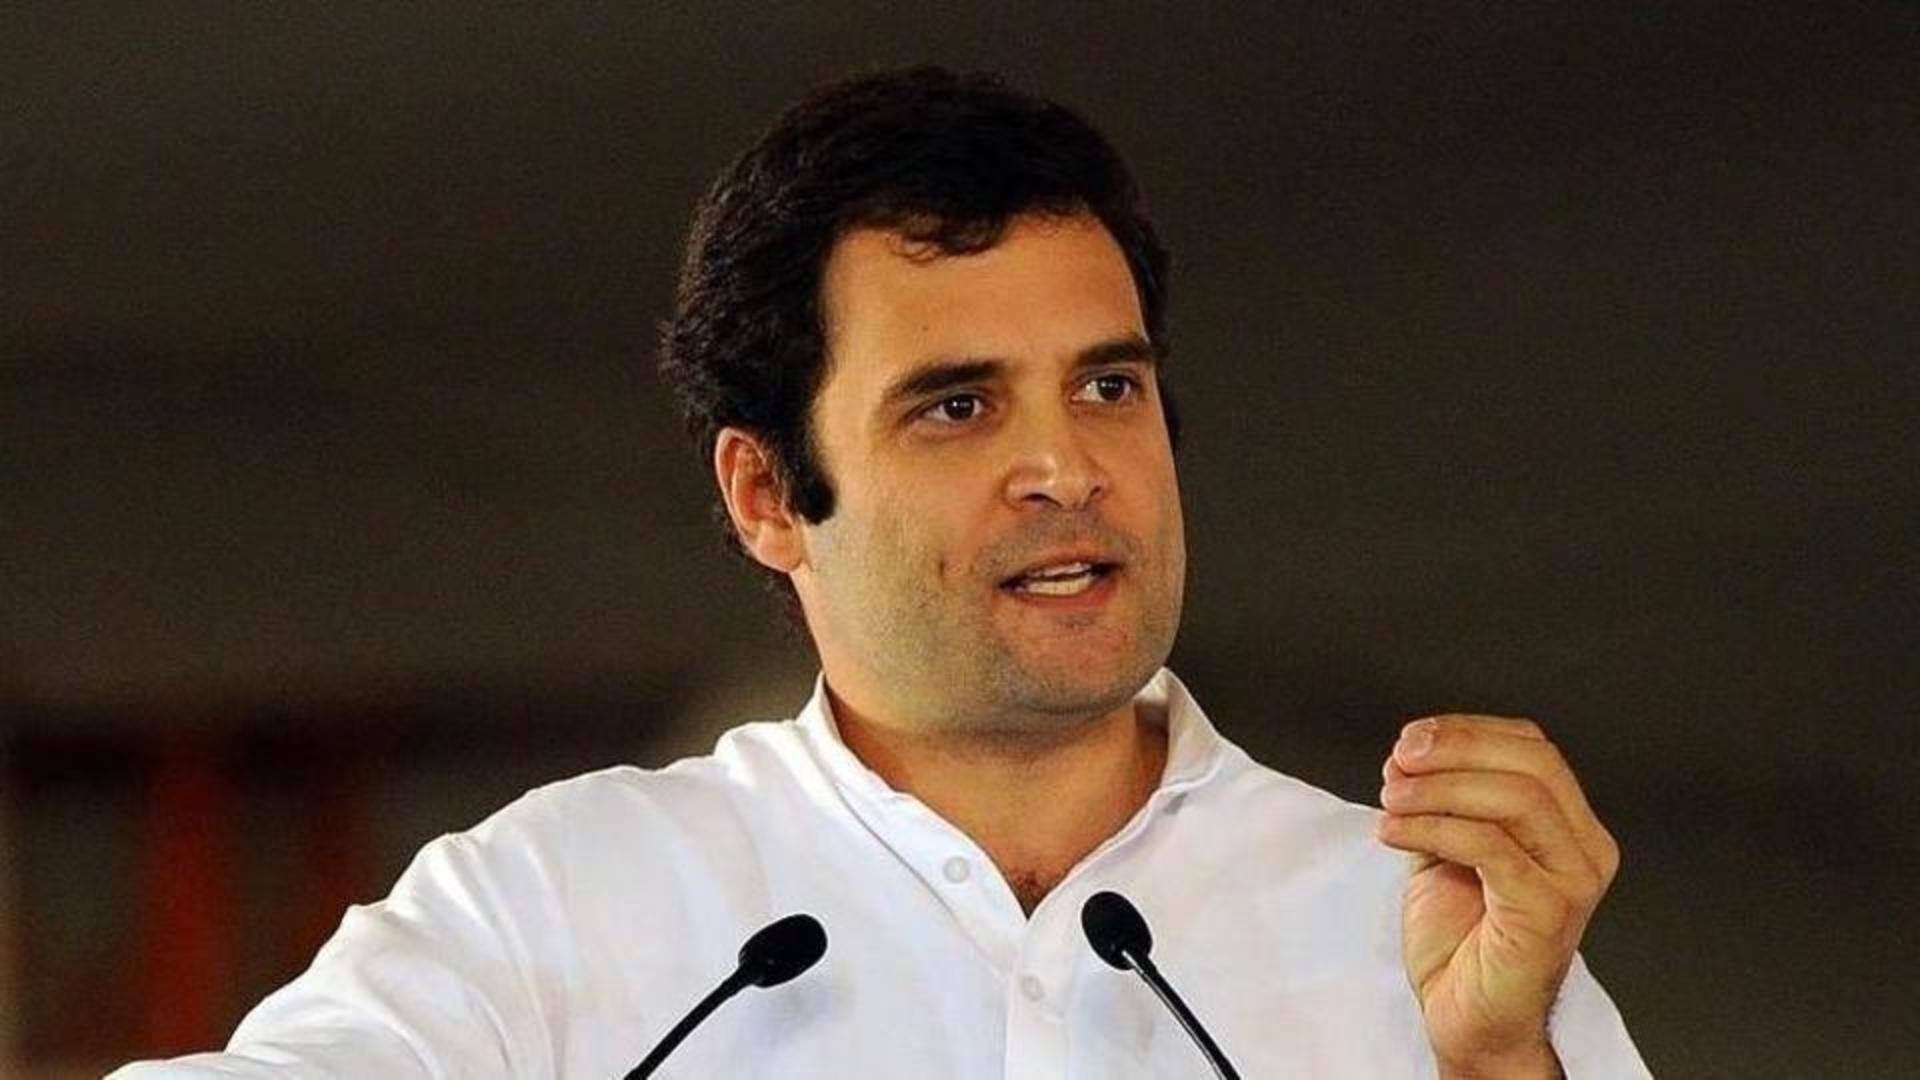 Rahul Gandhi's namesake, who contested against him in 2019, disqualified